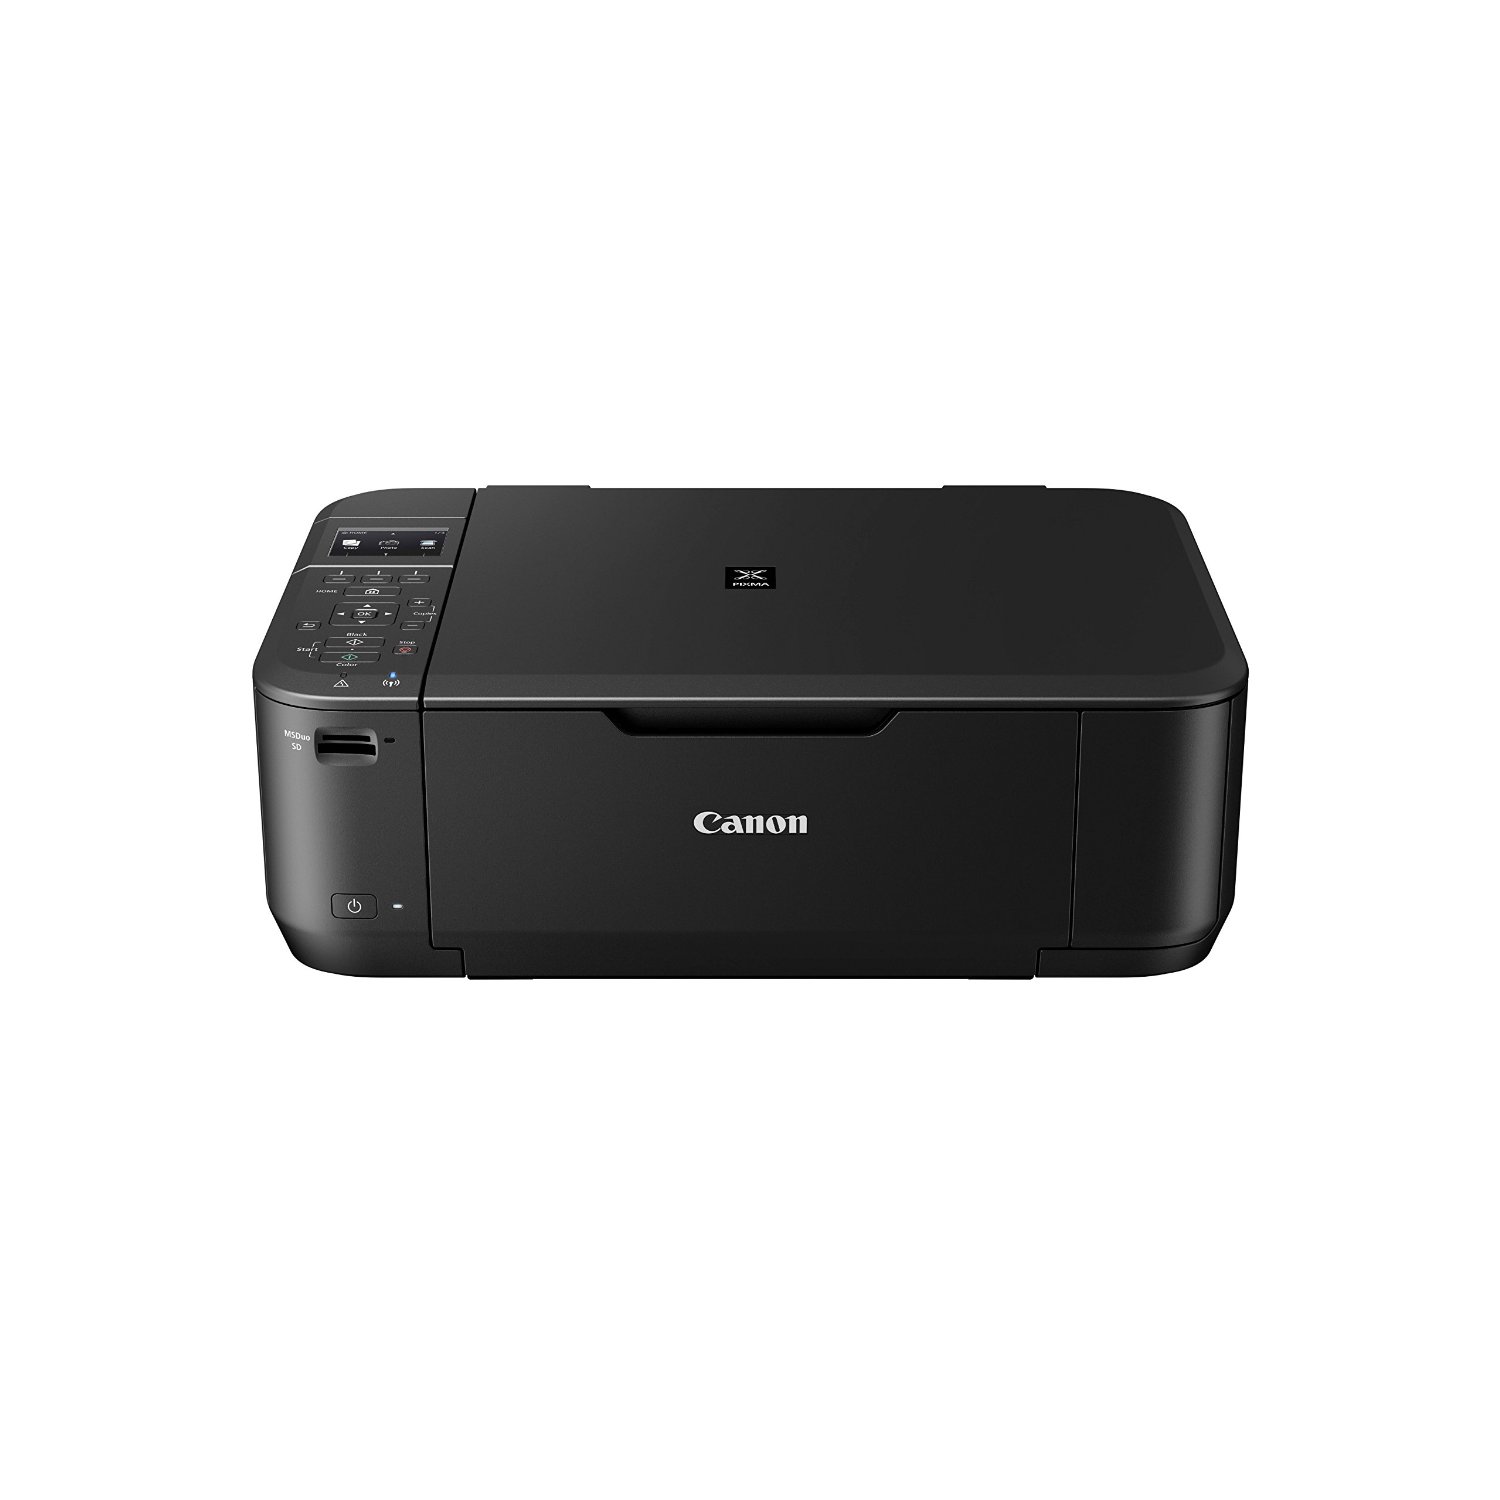 Canon-Pixma-MG4250-All-in-one-Multifunktionsgeraet